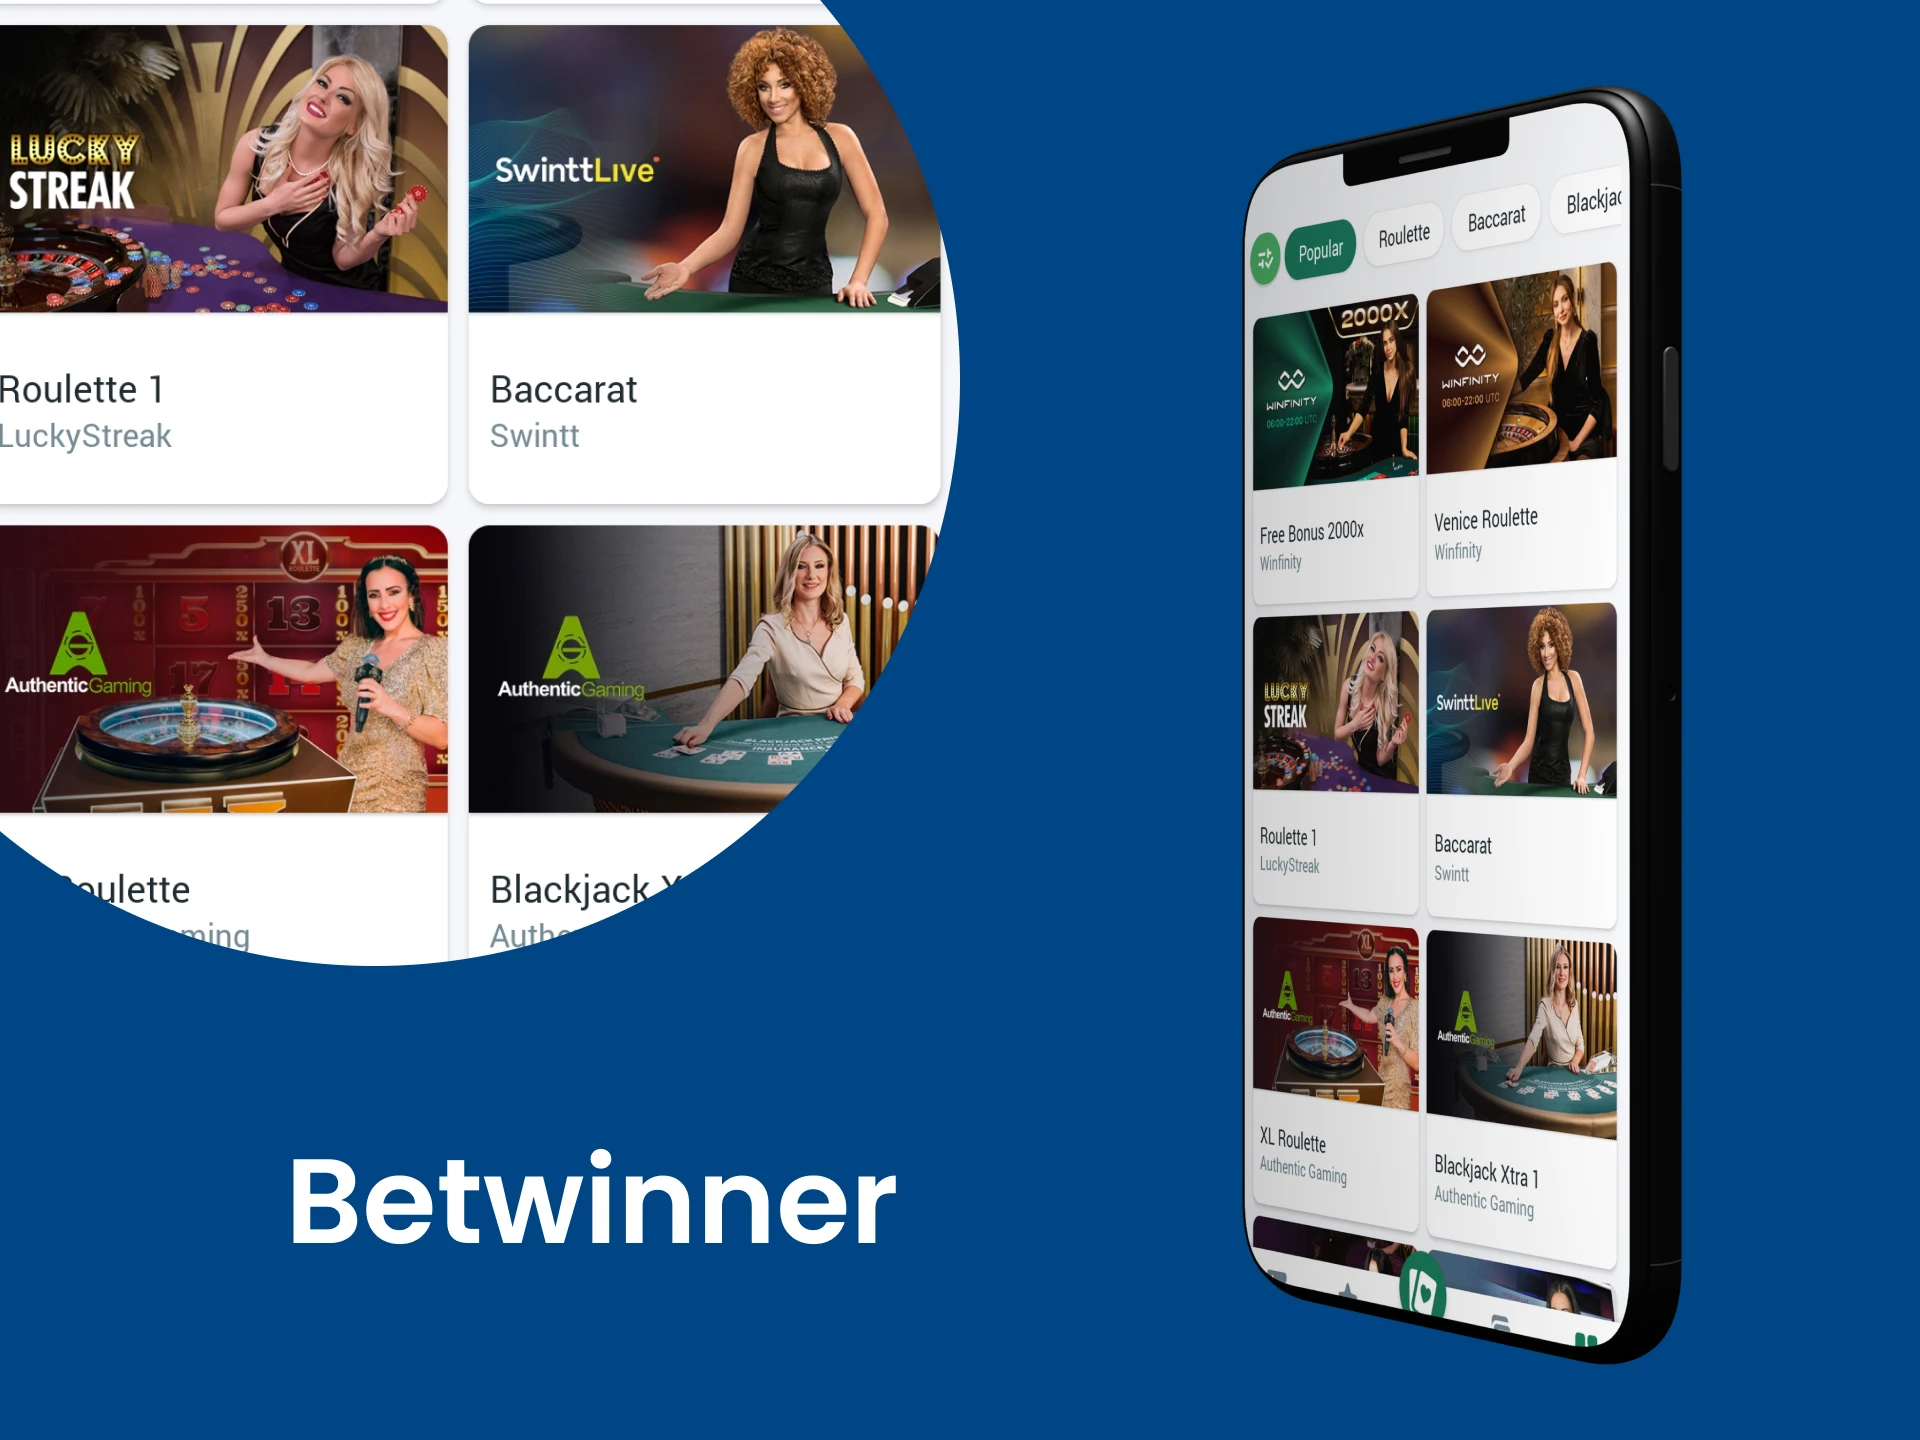 For casino games, choose Betwinner.